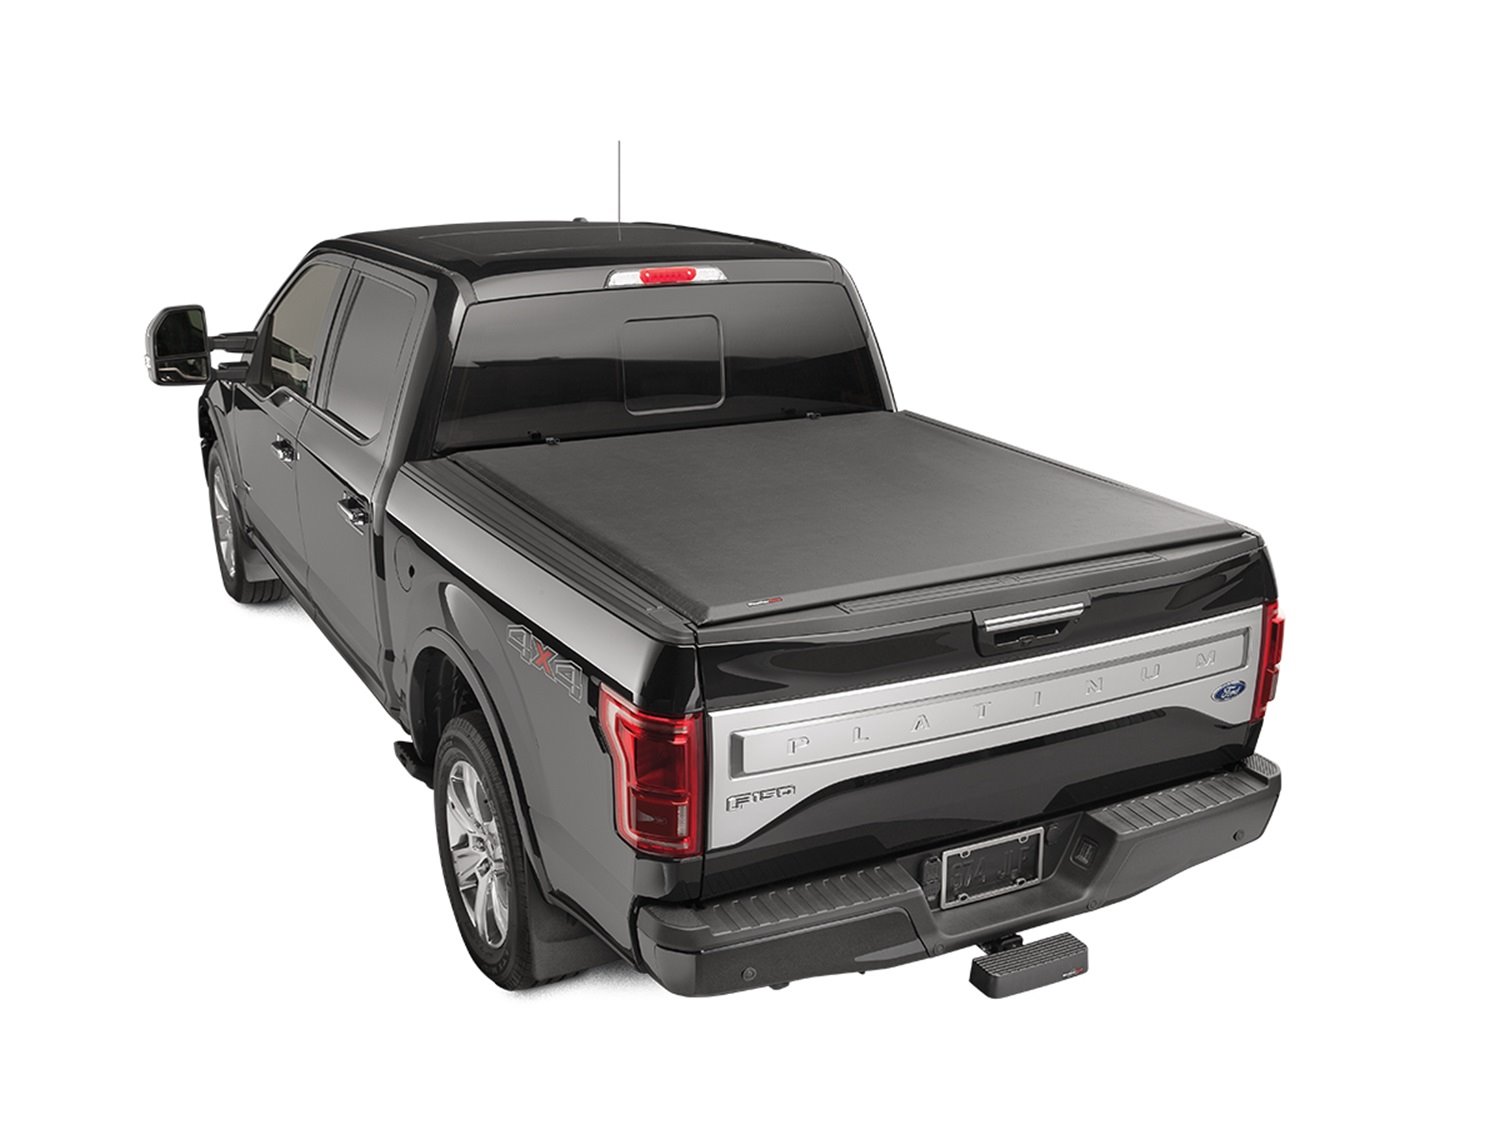 ROLL UP TRUCK BED COVER B DODGE RAM 2009-2017 RAM 5 7 BED